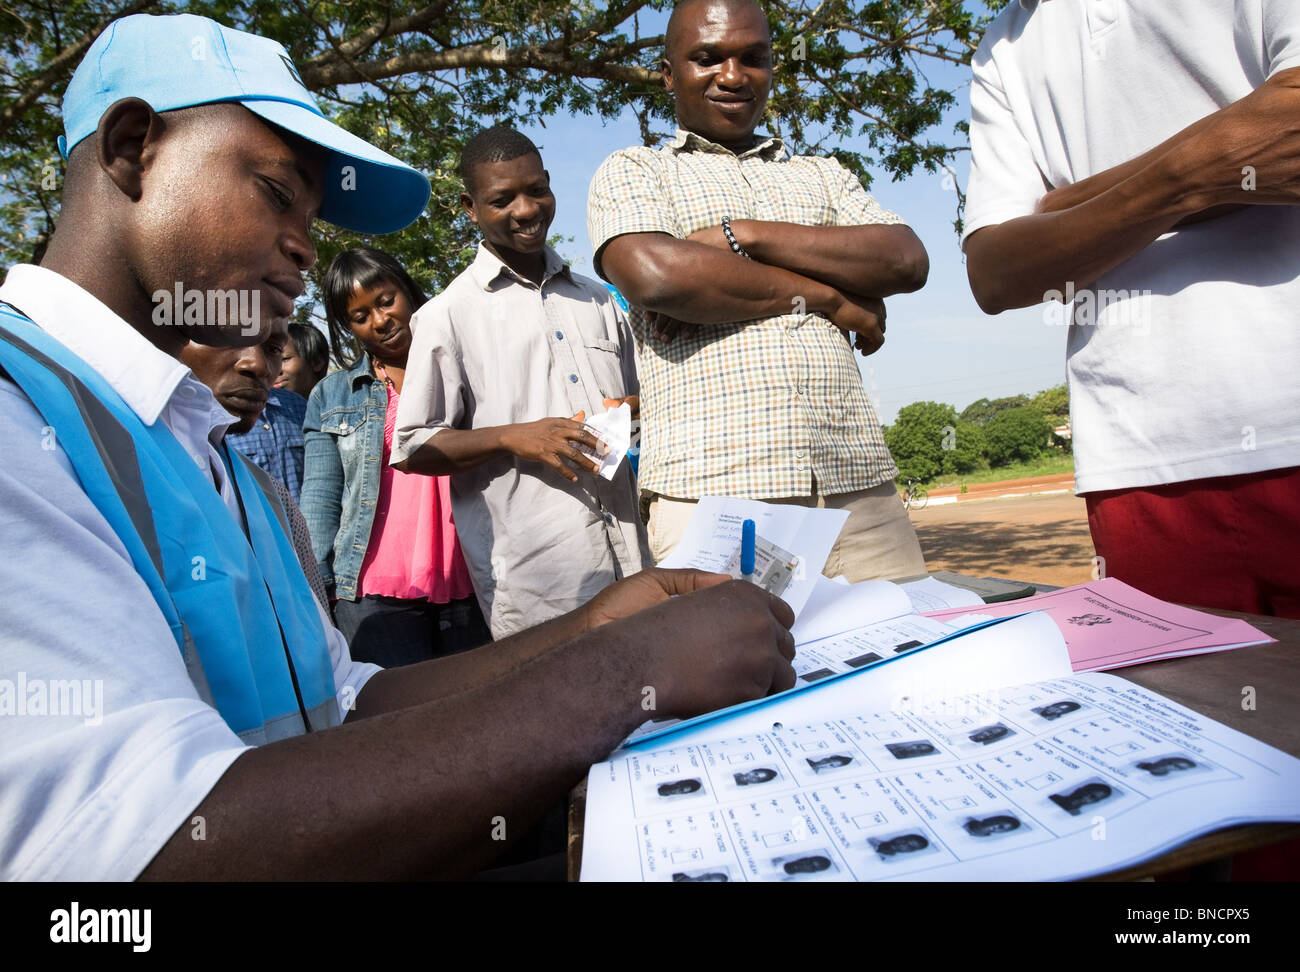 A worker from the Ghana Electoral Commission checks the identity of a voter during elections in Accra, Ghana Stock Photo